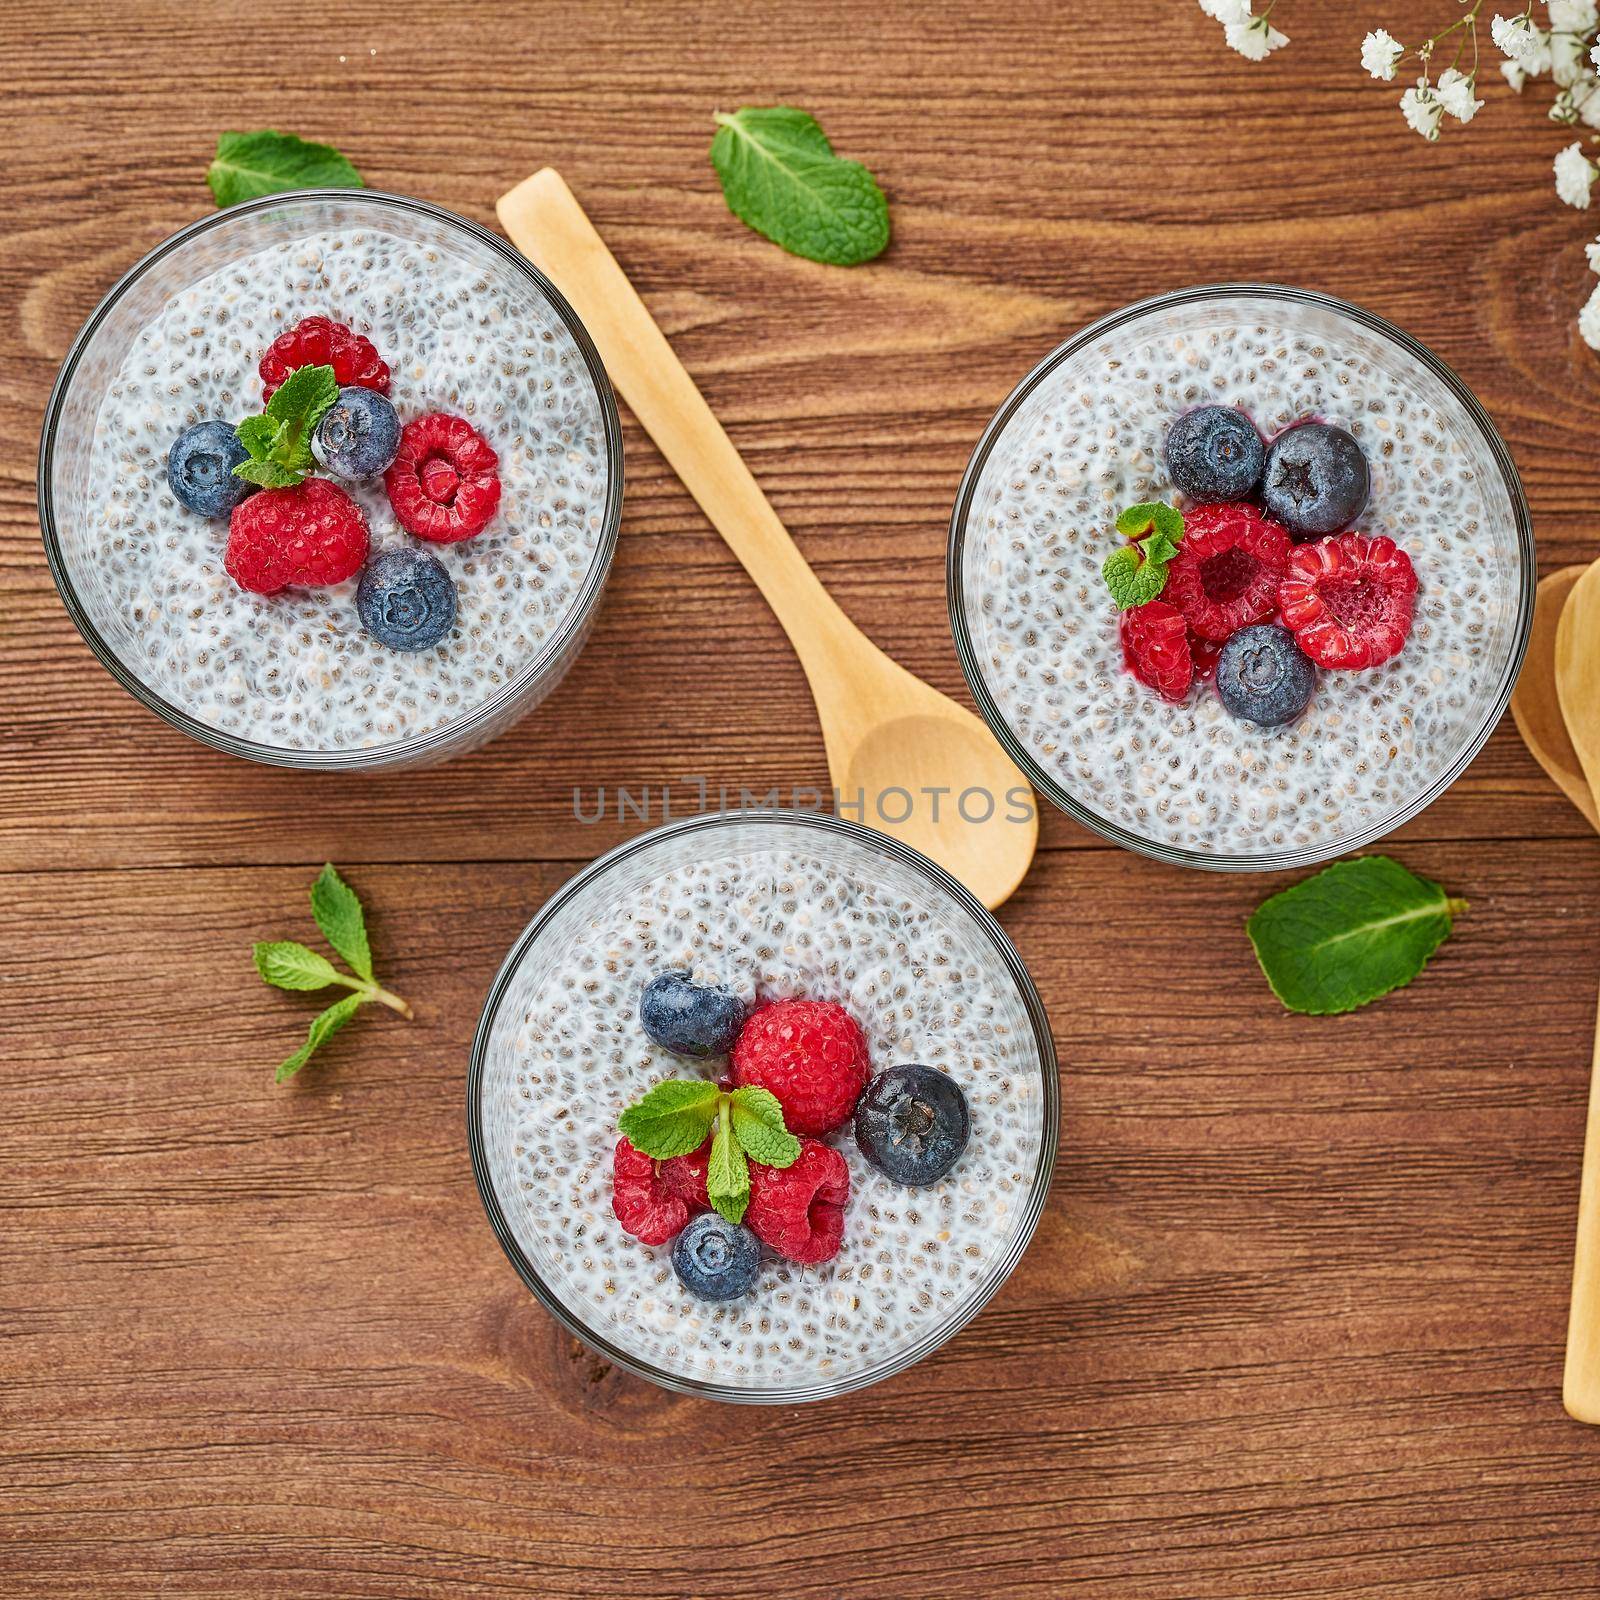 Chia pudding with fresh berries raspberries, blueberries. Top view, three glass on brown wooden background, close up.